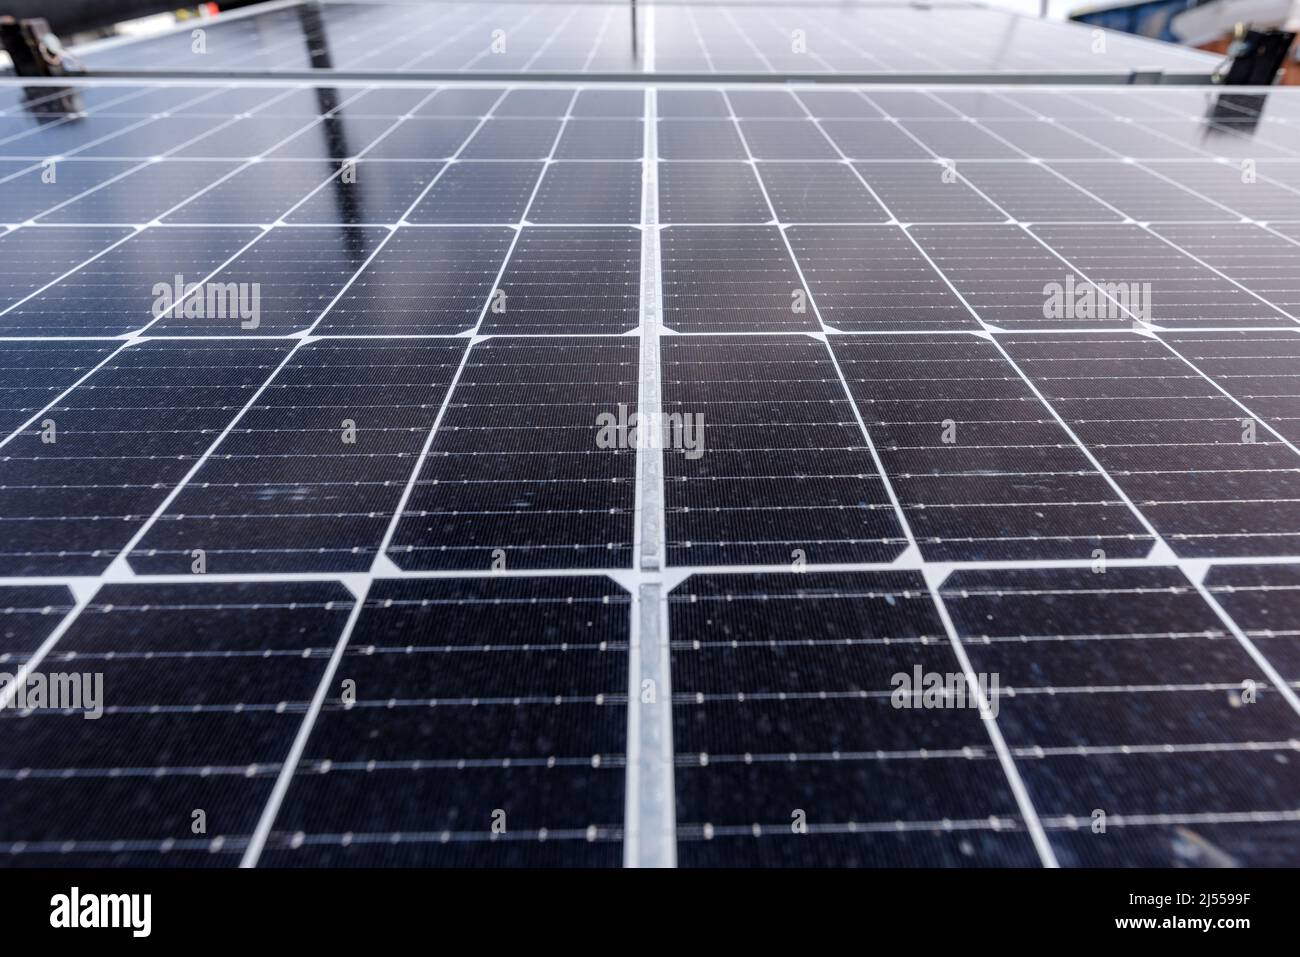 Photovoltaic cells on solar panel of PV system, selective focus Stock Photo